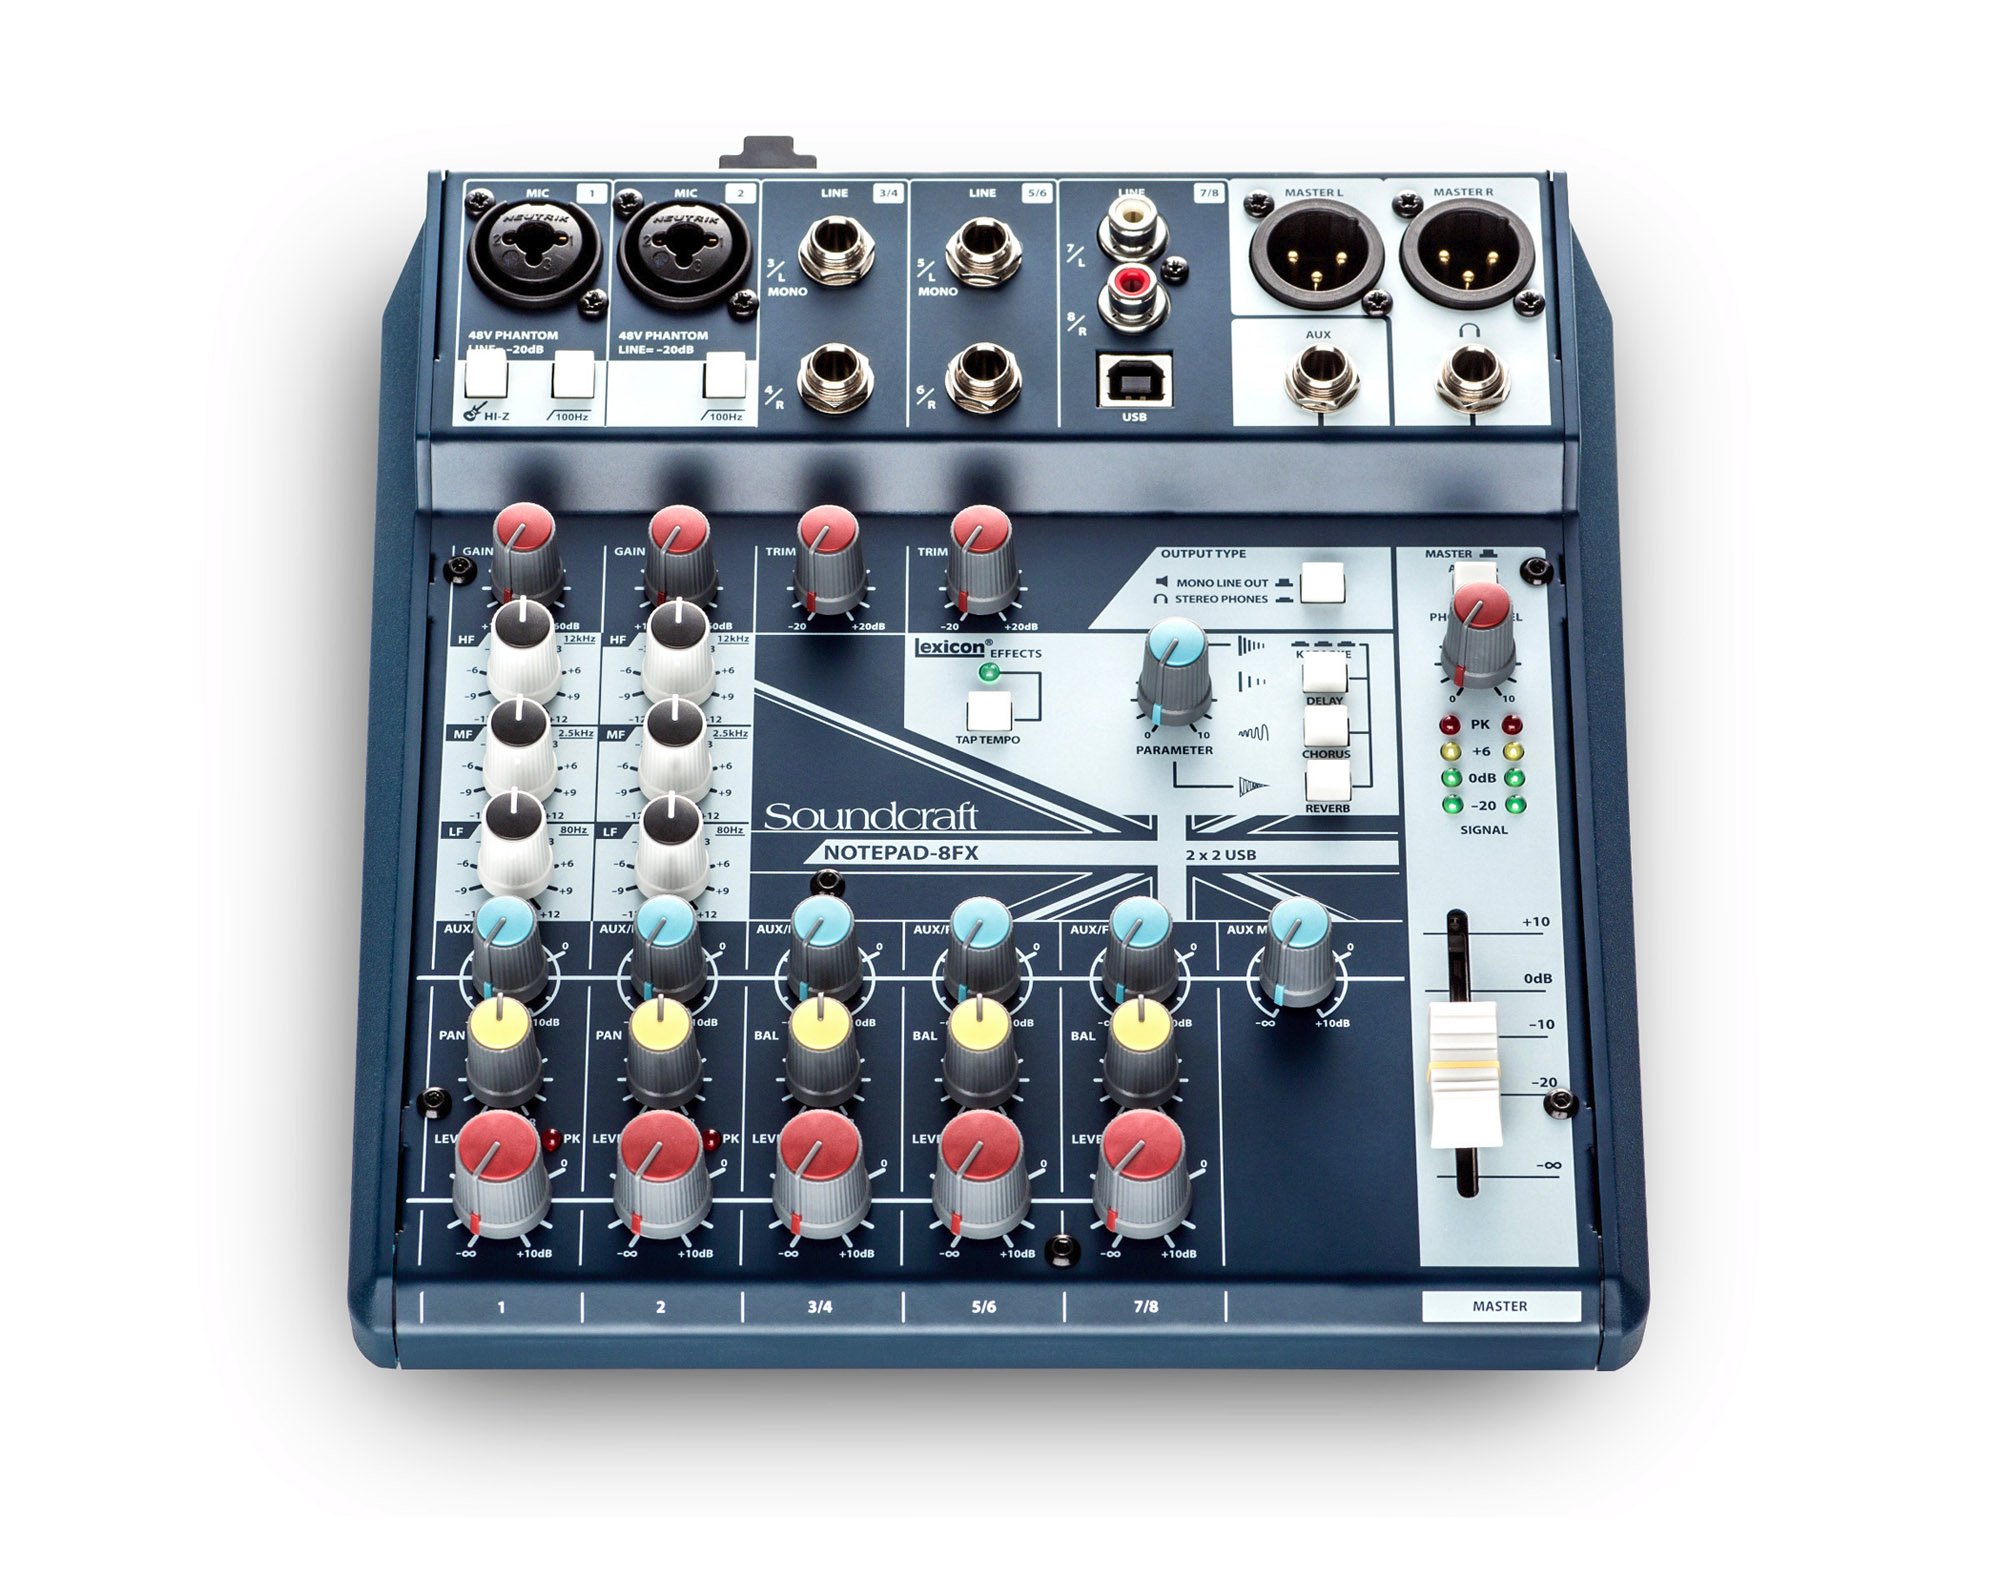 Soundcraft　Full　Mixer　Lexicon　Notepad-8FX　Compass　8-Channel　Compact　Effects　Analog　With　And　USB　Systems